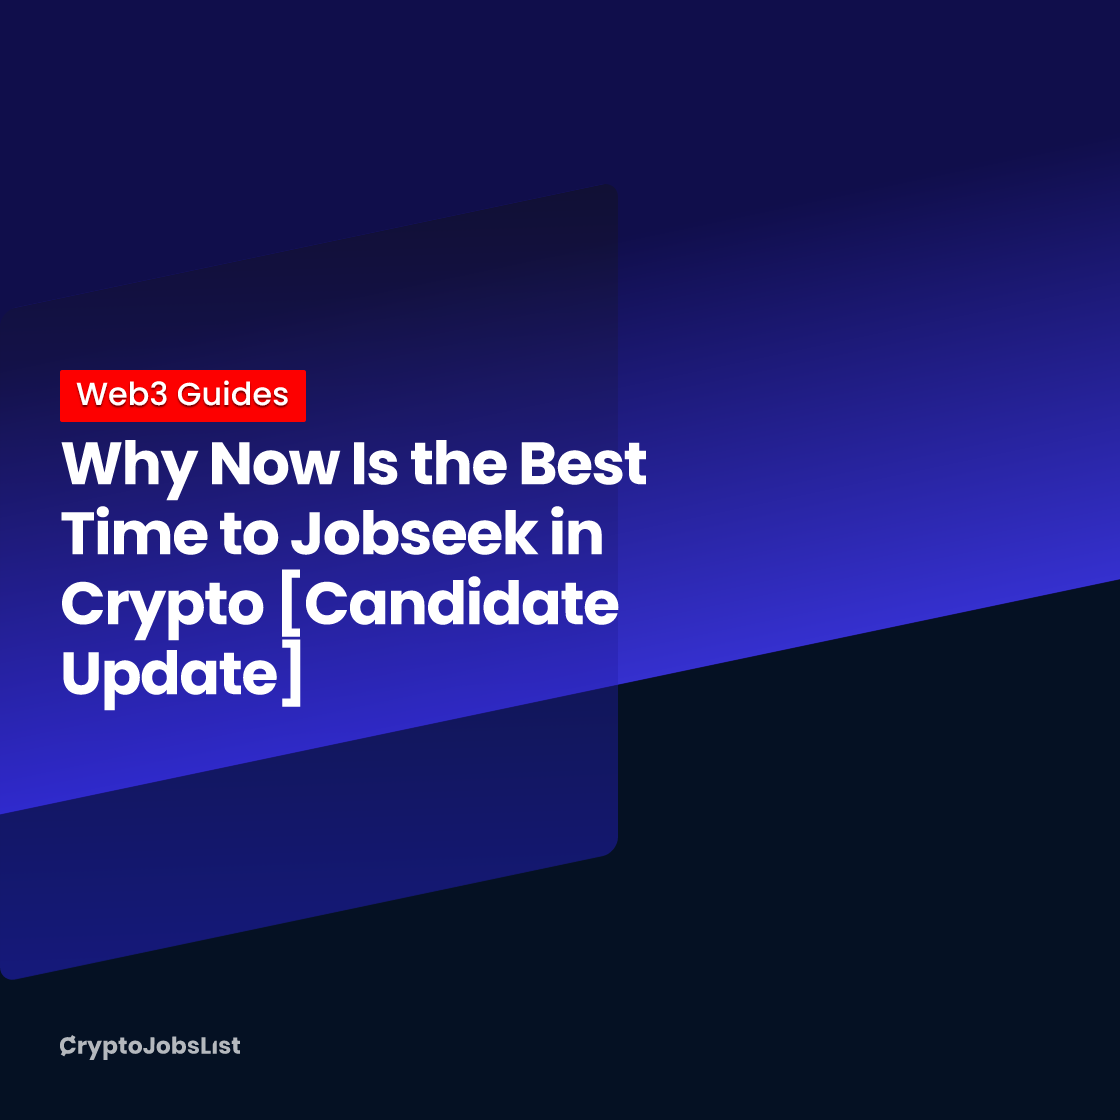 Why Now Is the Best Time to Jobseek in Crypto [Candidate Update]